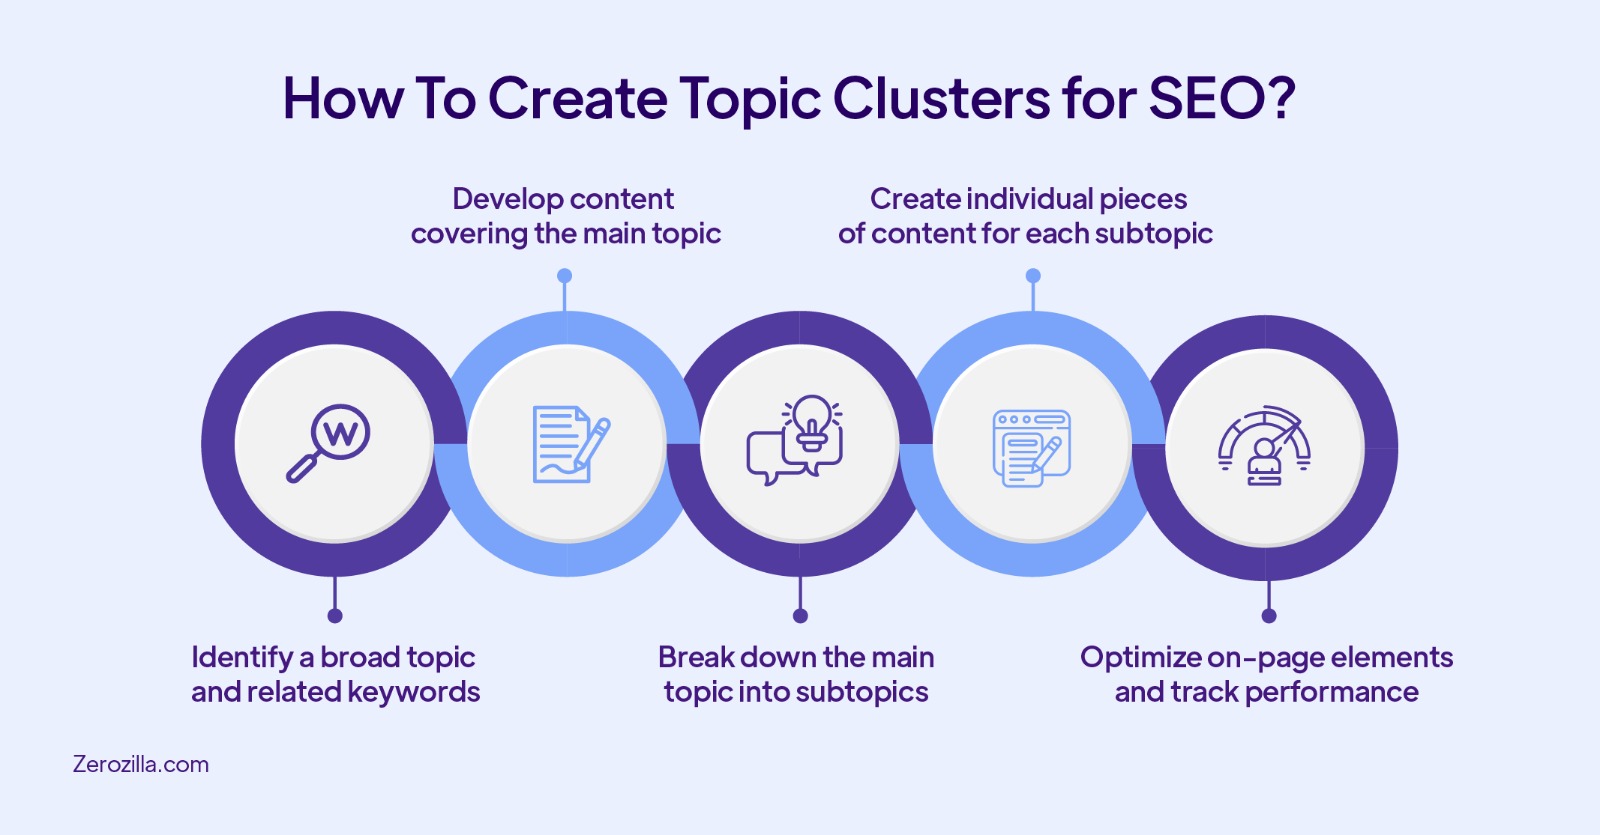 How To Create Topic Clusters for SEO